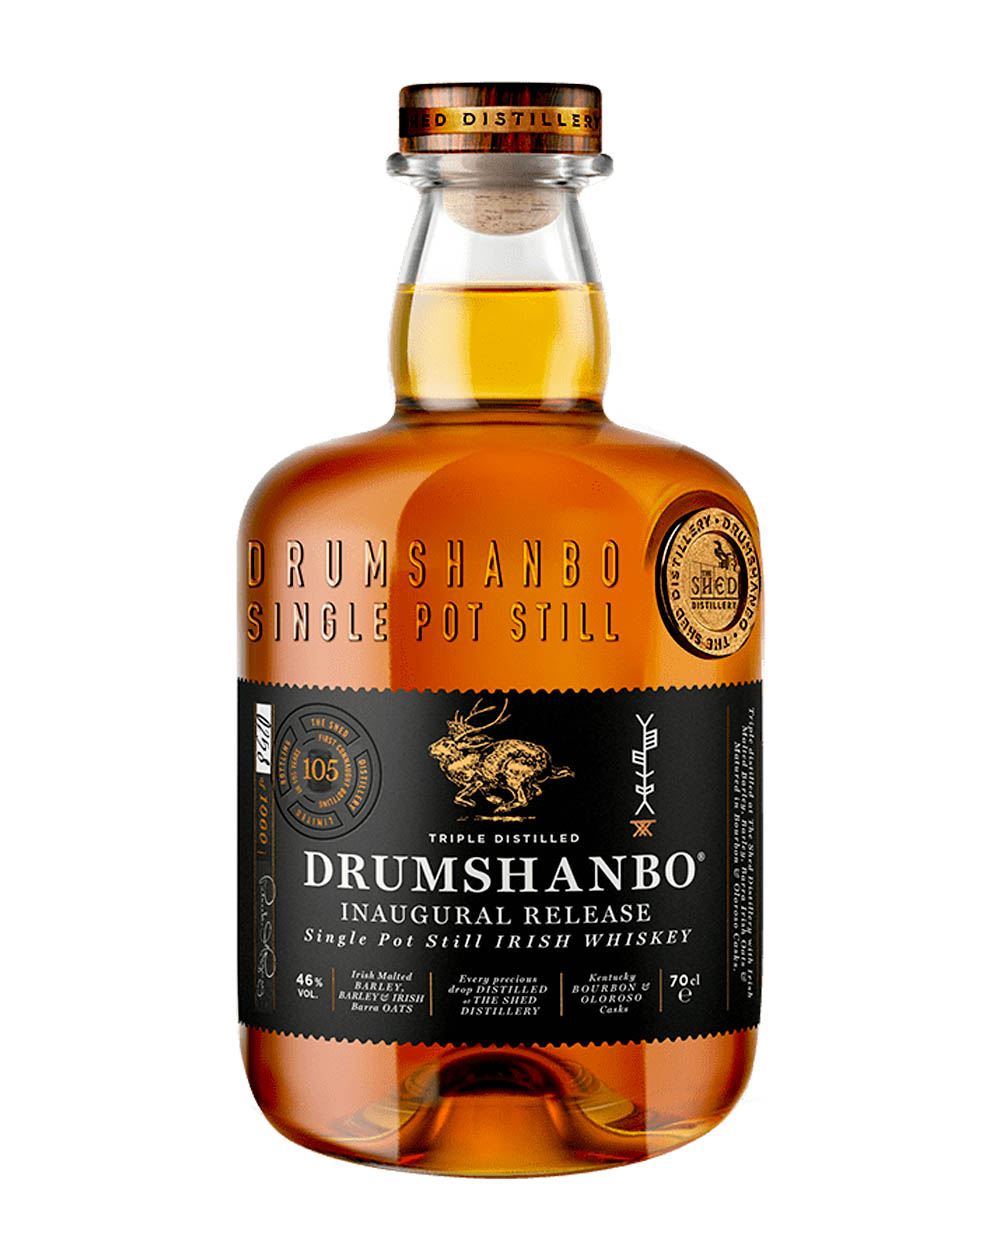 Drumshanbo Inaugural Release Musthave Malts MHM